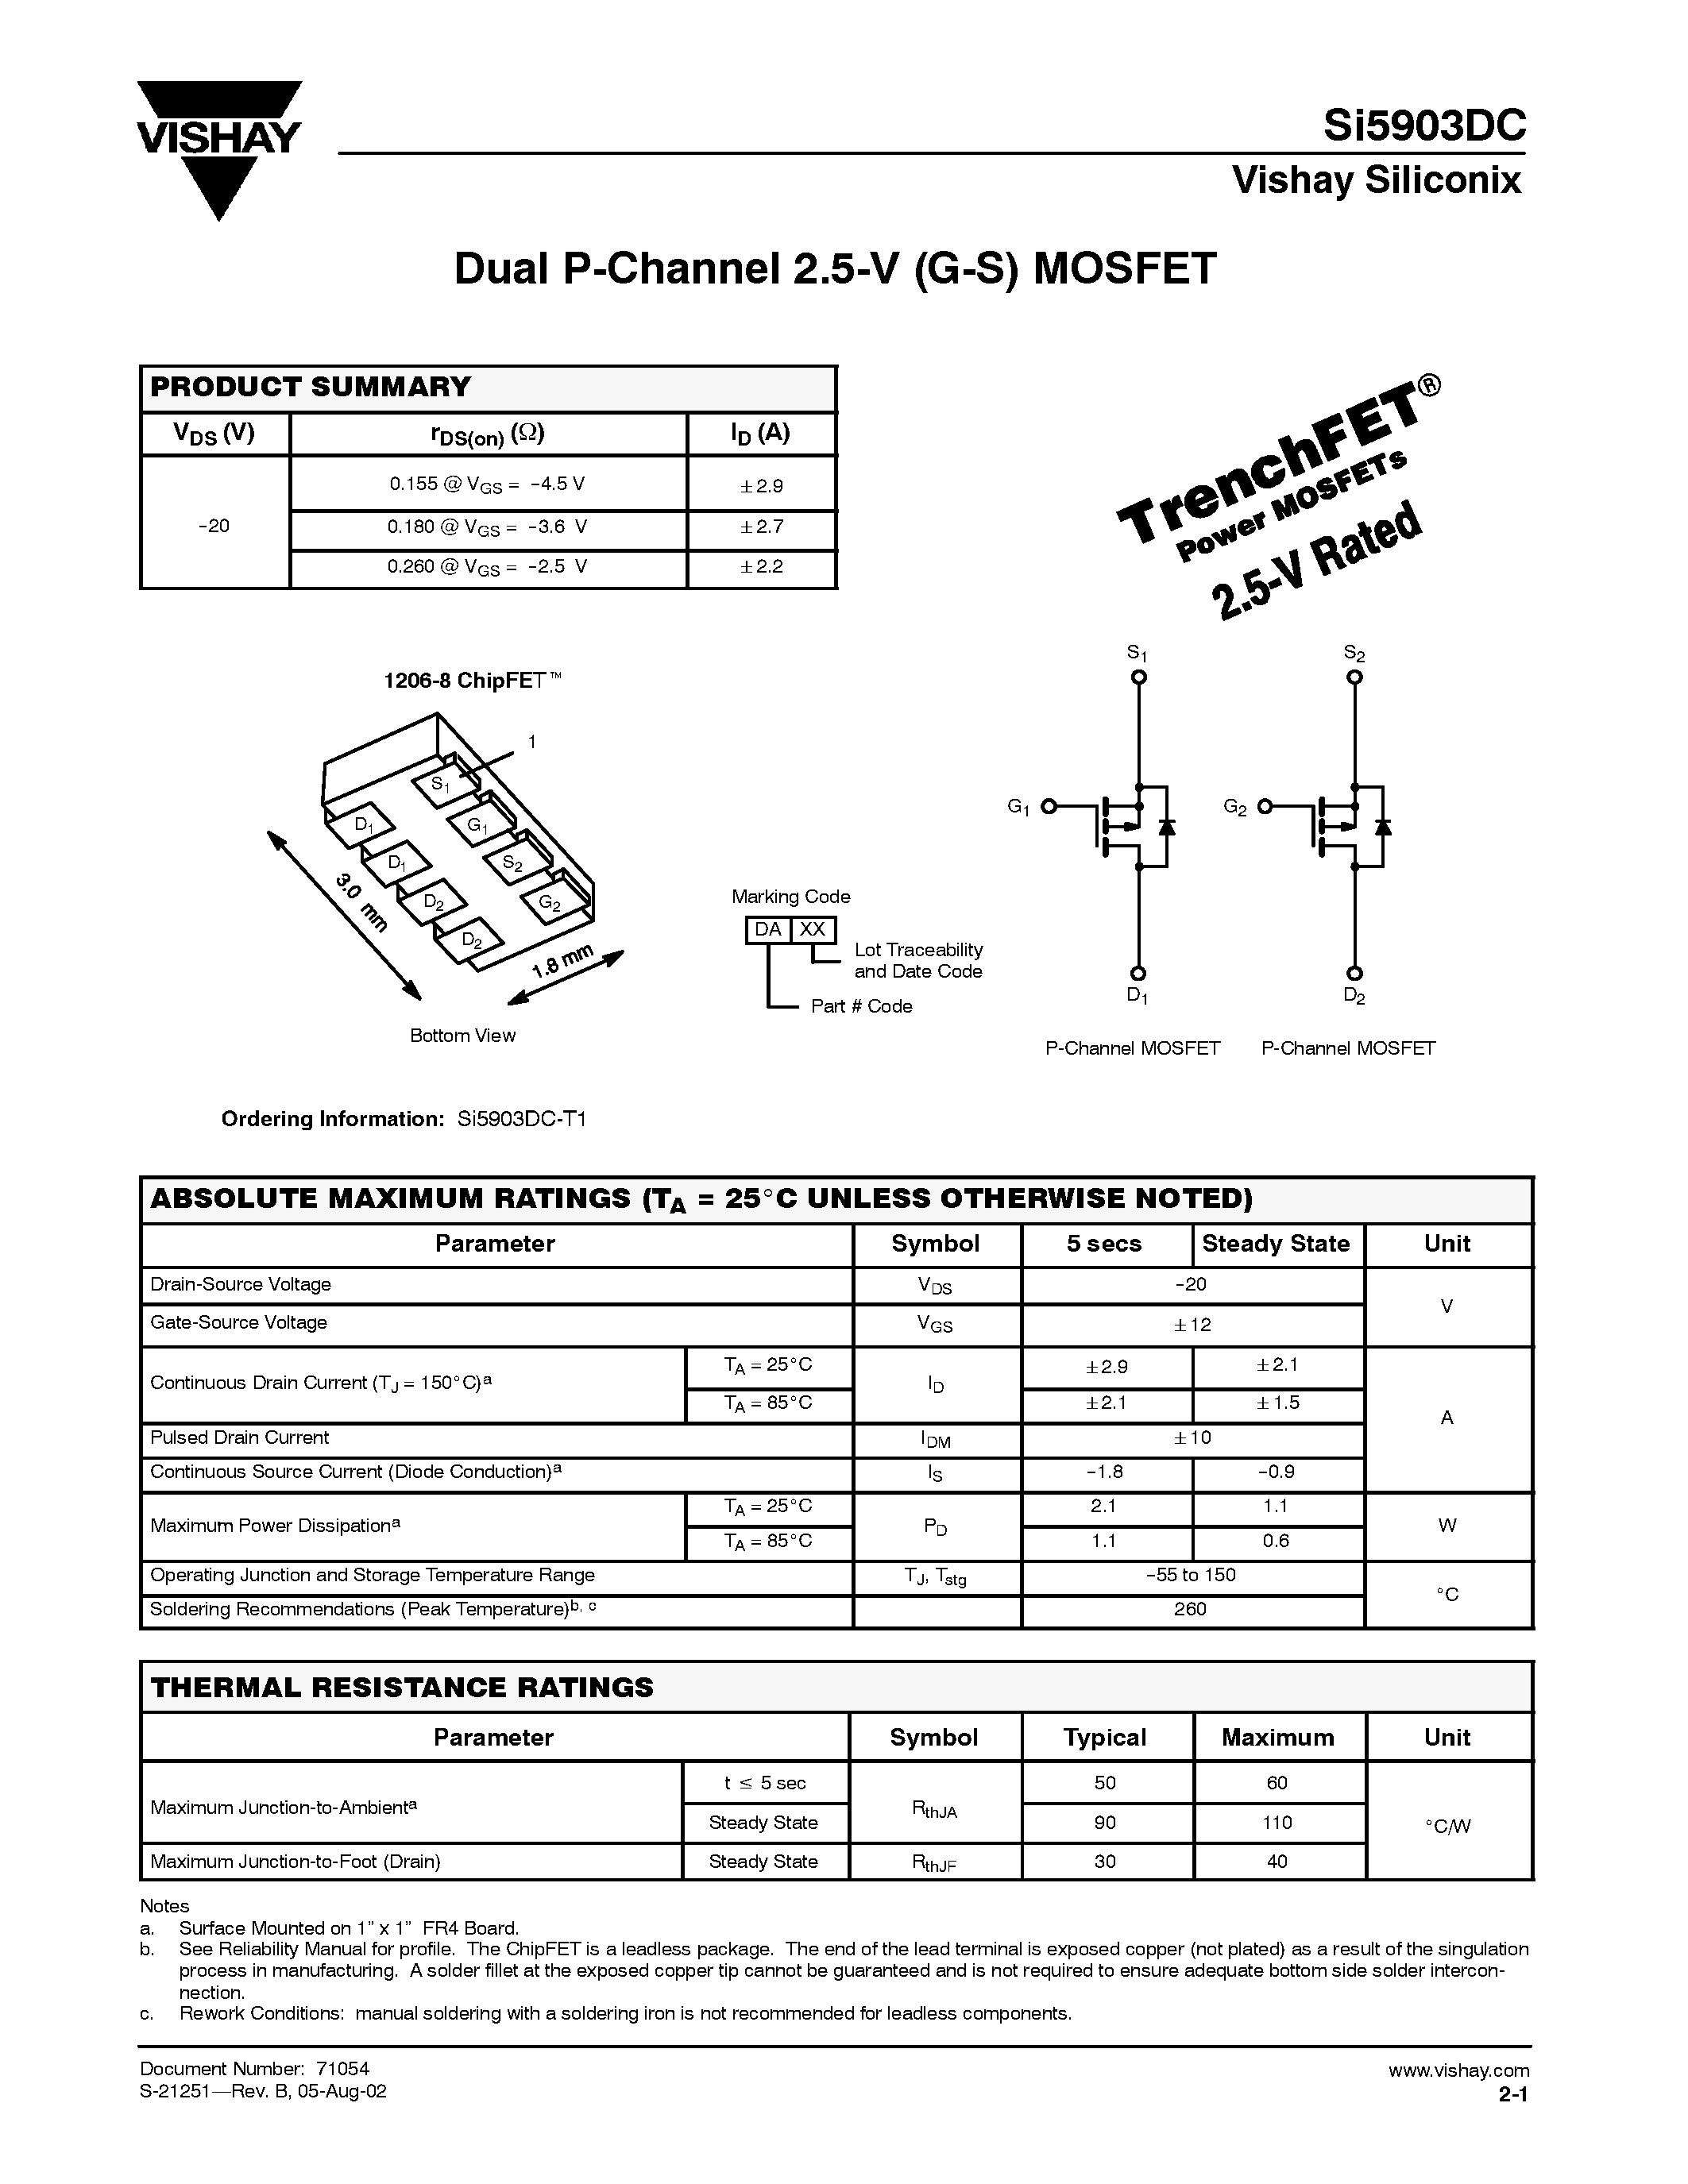 Даташит SI5903DC-T1 - Dual P-Channel 2.5-V (G-S) MOSFET страница 1